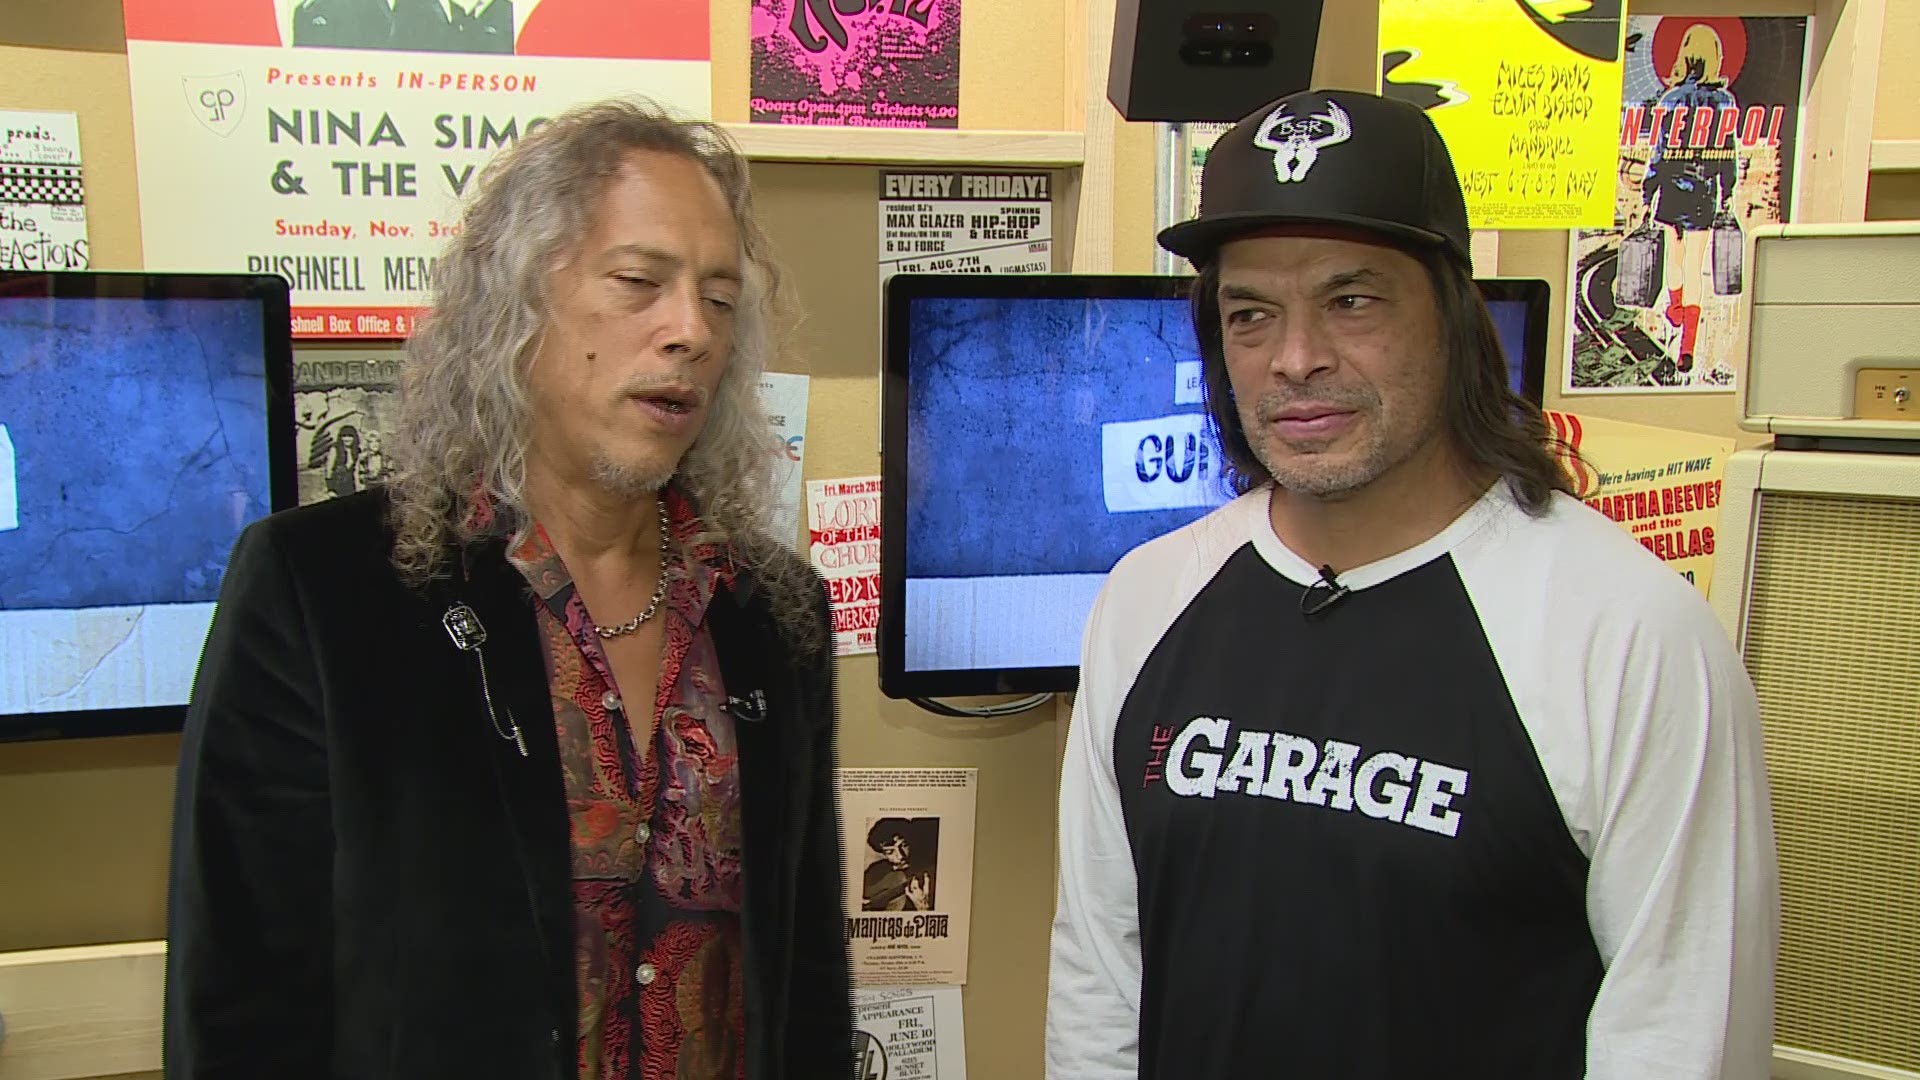 Metallica guitarist Kirk Hammett and bassist Robert Trujillo were at the Rock Hall on Thursday. They are helping to celebrate the opening of 'Play it Loud.'